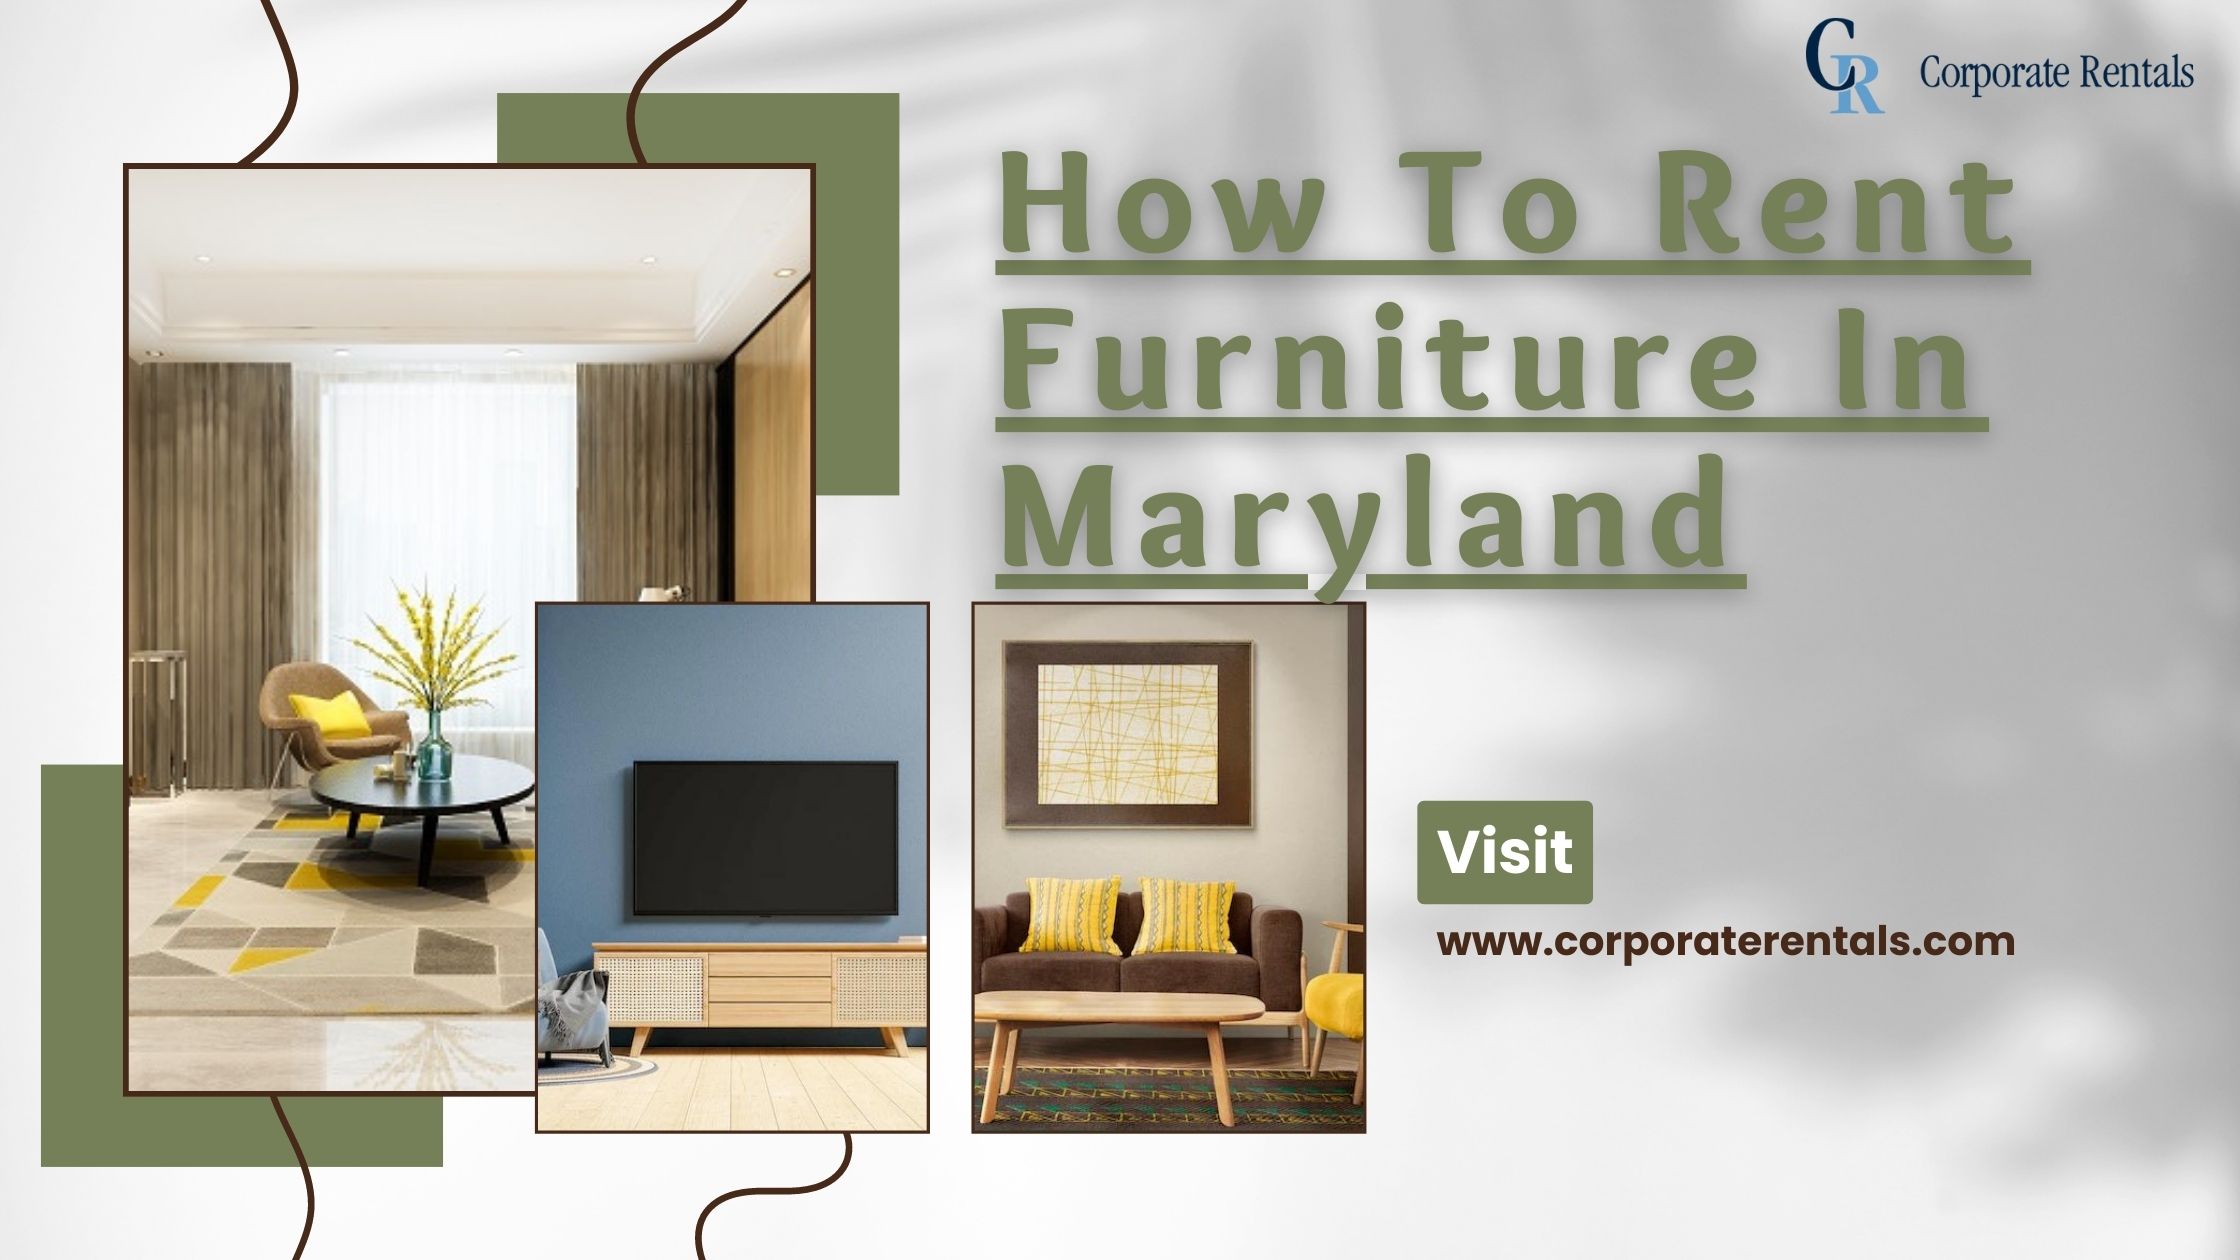 How To Rent Furniture In Maryland